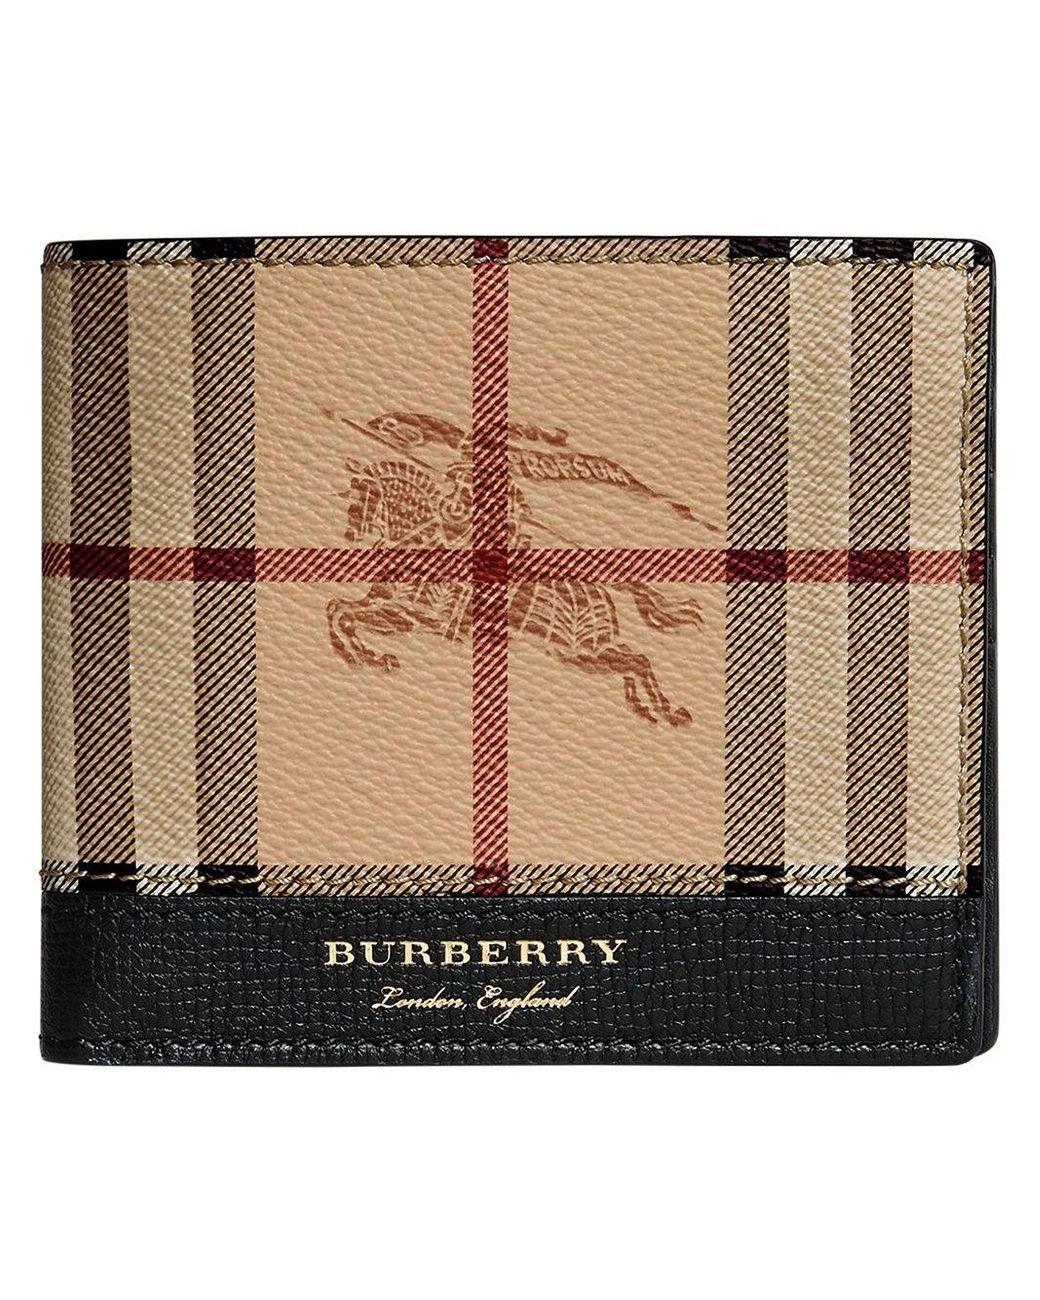 Burberry Haymarket Check And Leather International Bifold Wallet in Black  for Men | Lyst